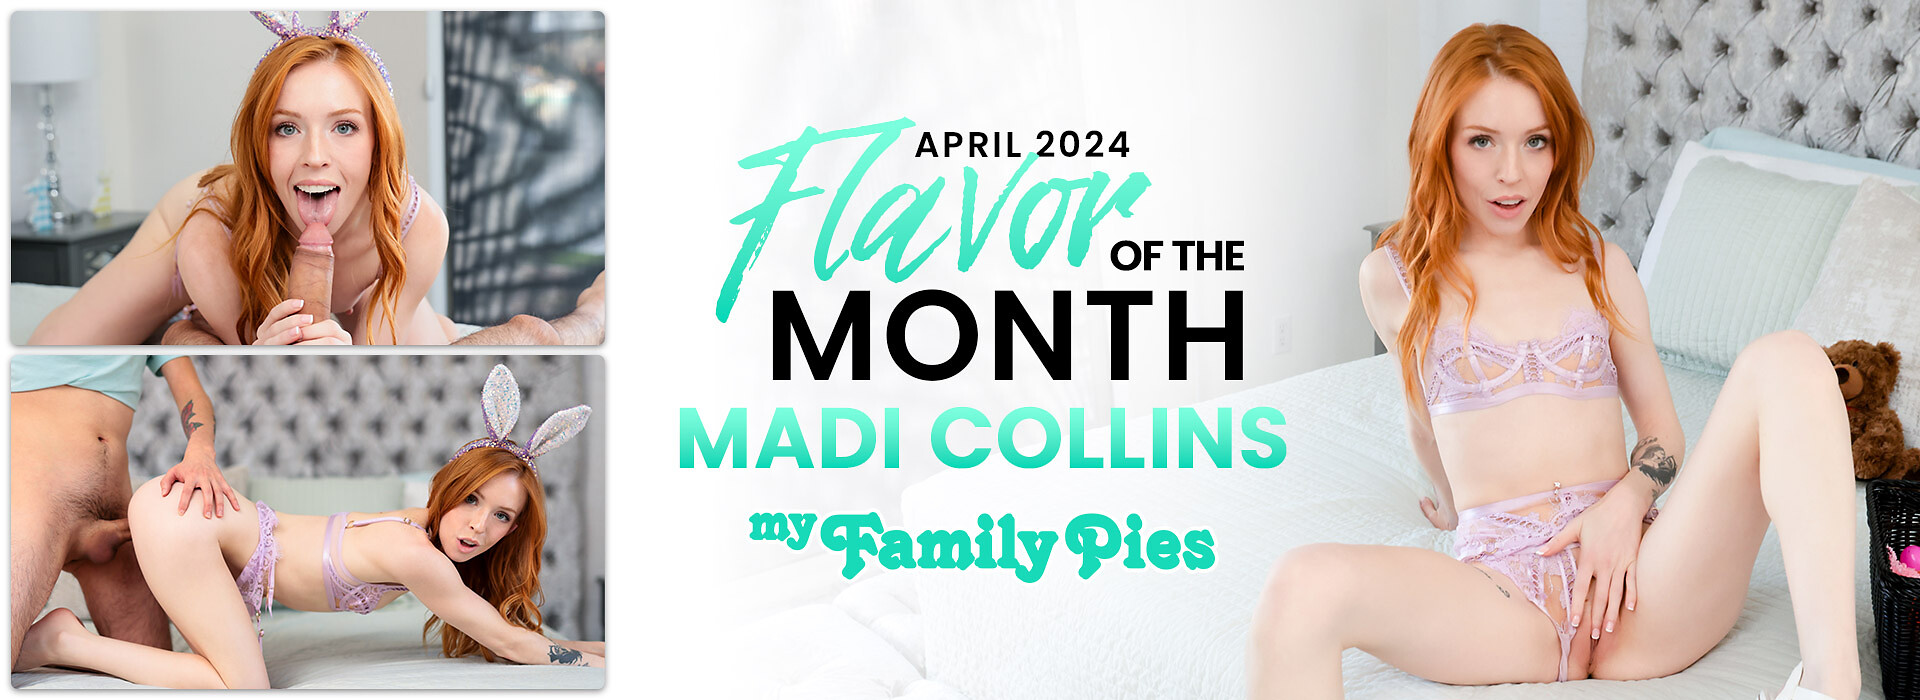 April 2024 Flavor Of The Month Madi Collins